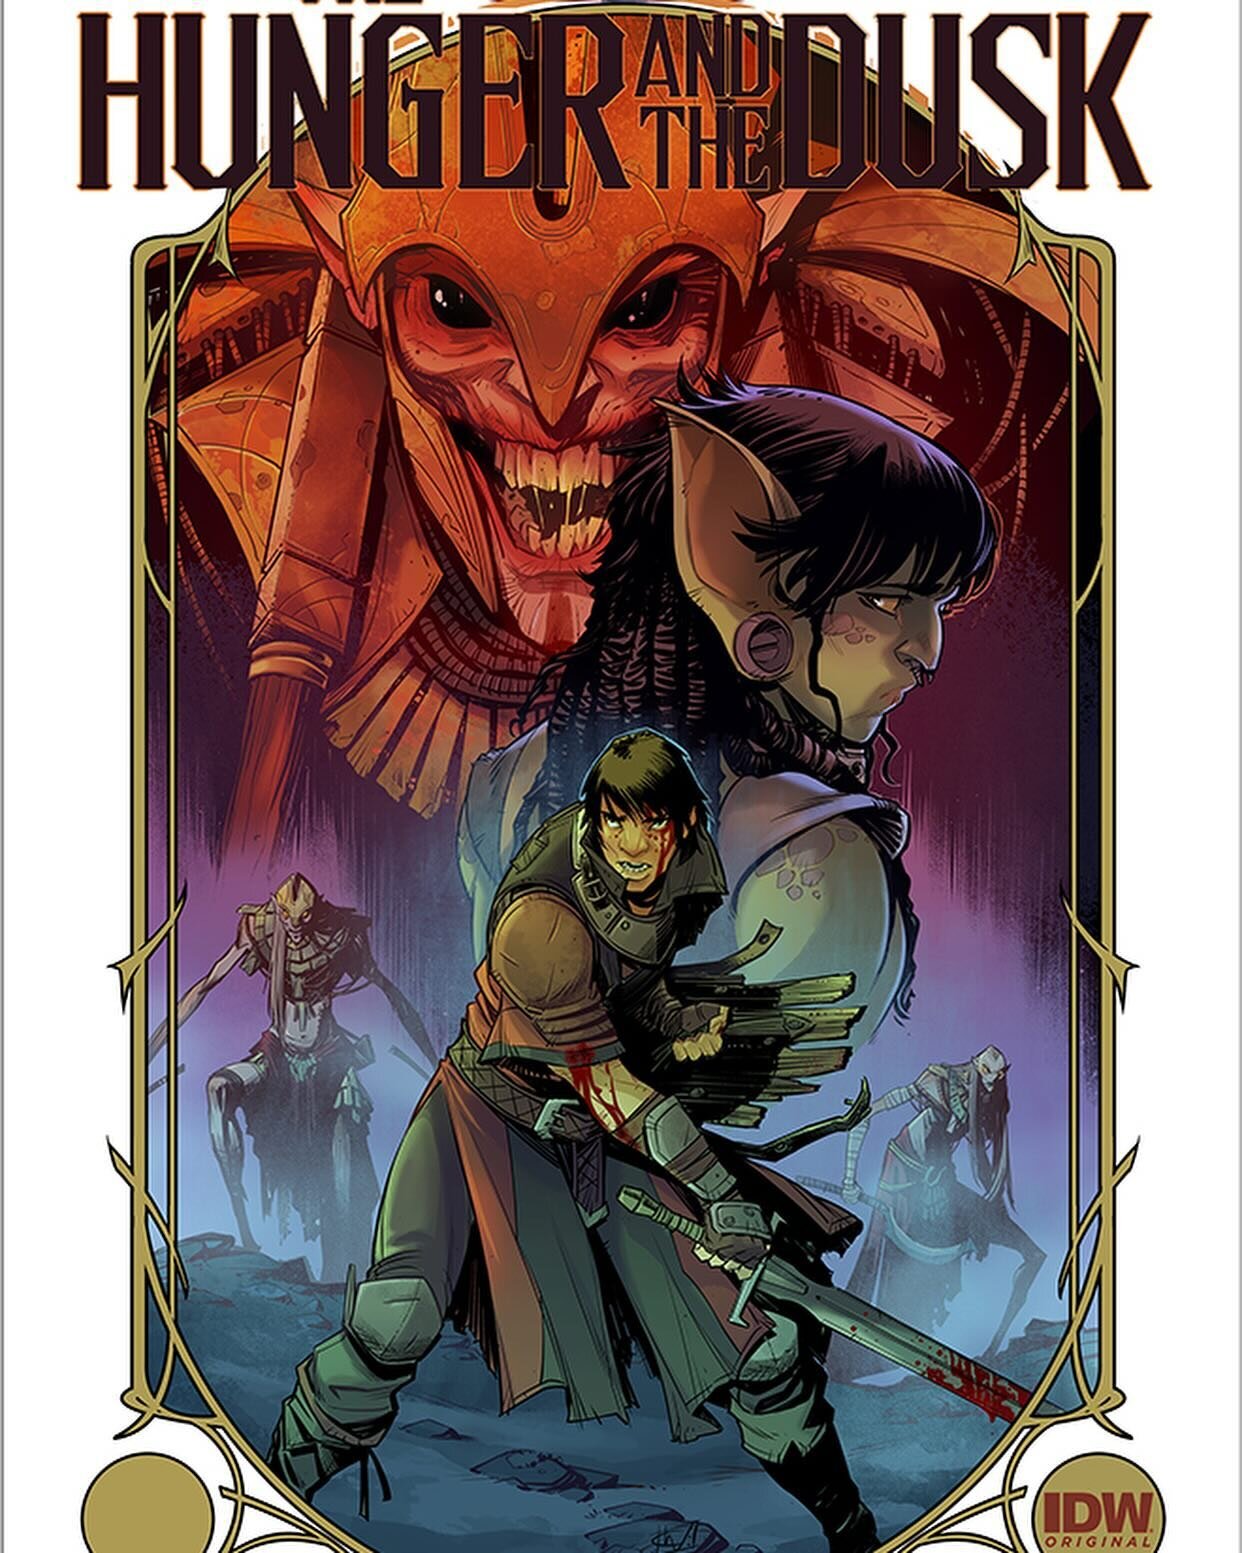 The Hunger And The Dusk: Issue 5 - cover process. -
This was one of my favourite covers of the series. Finally getting to use the Vangol warlord. and just making a big feature out of his looming sinister presence after having him in the wings for so 